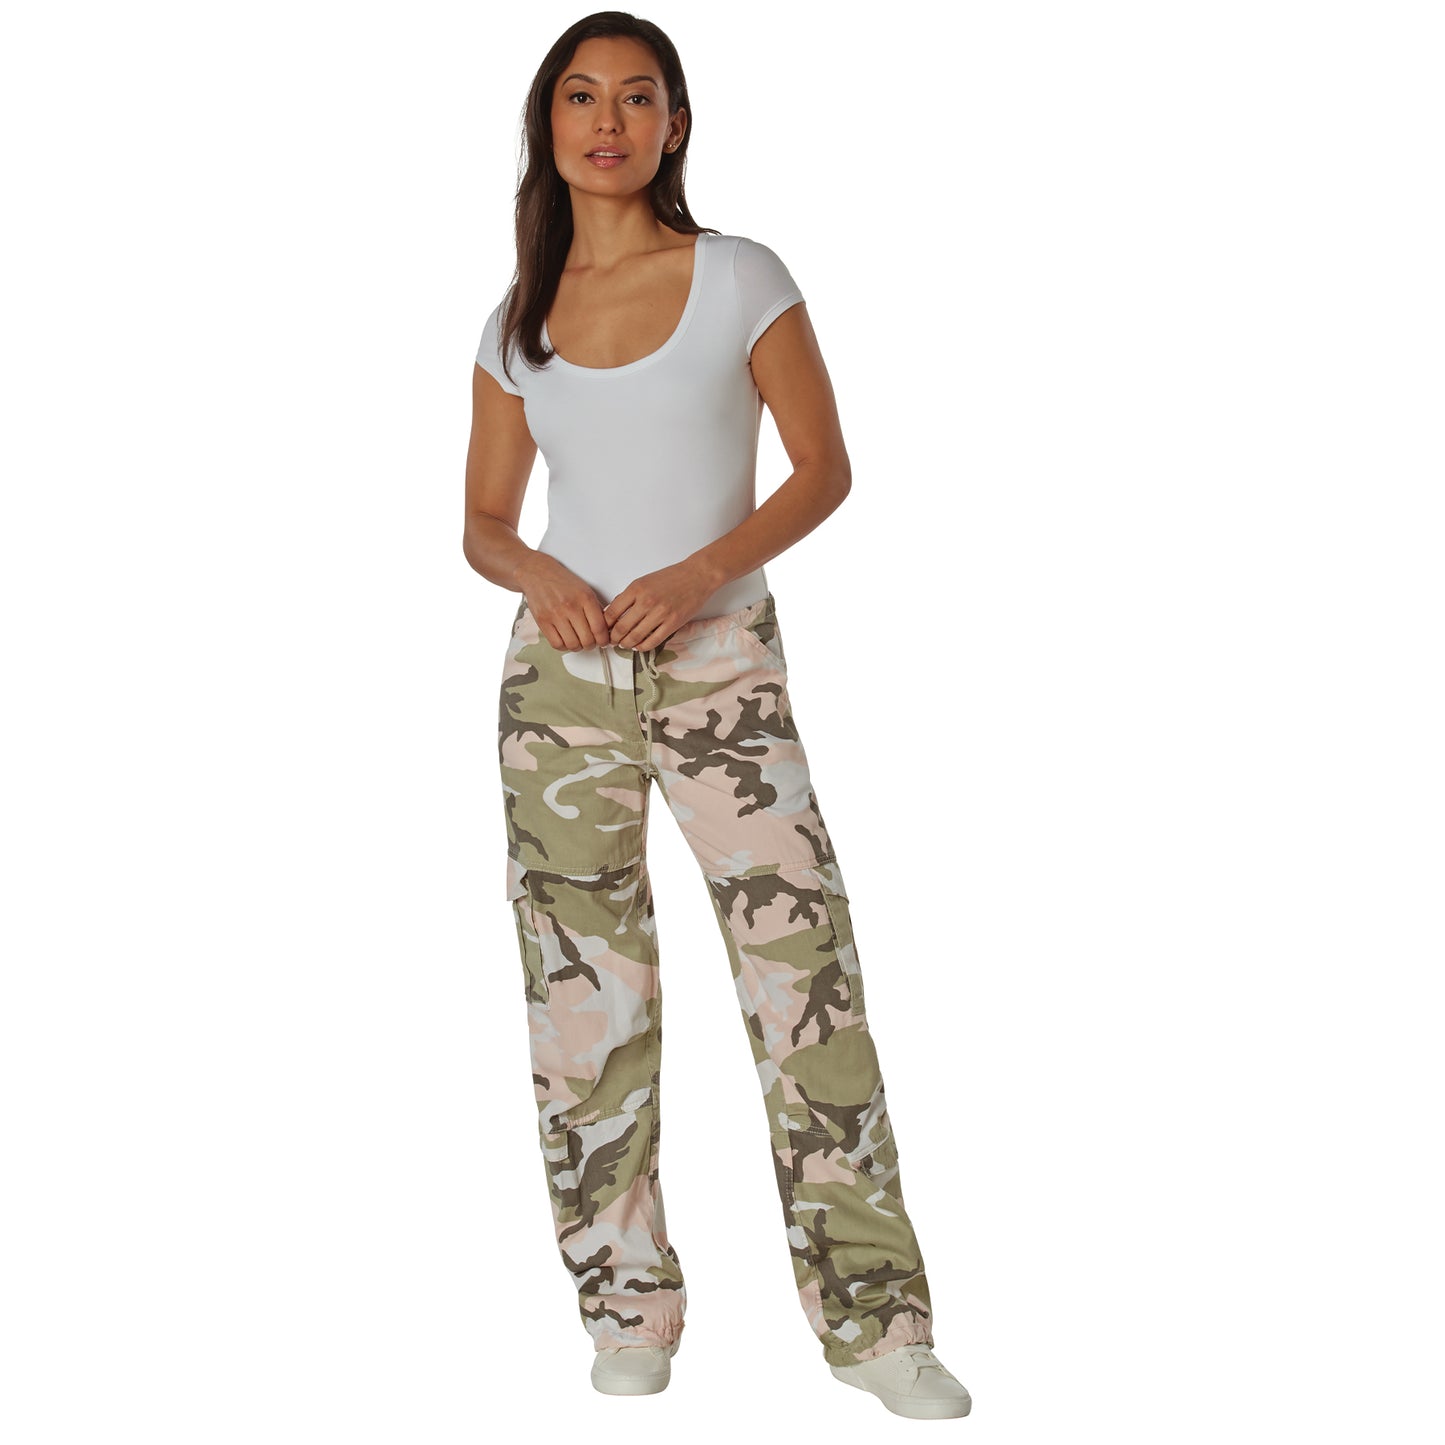 Rothco Women's Camo Vintage Paratrooper Fatigue Pants - Subdued Pink Camo